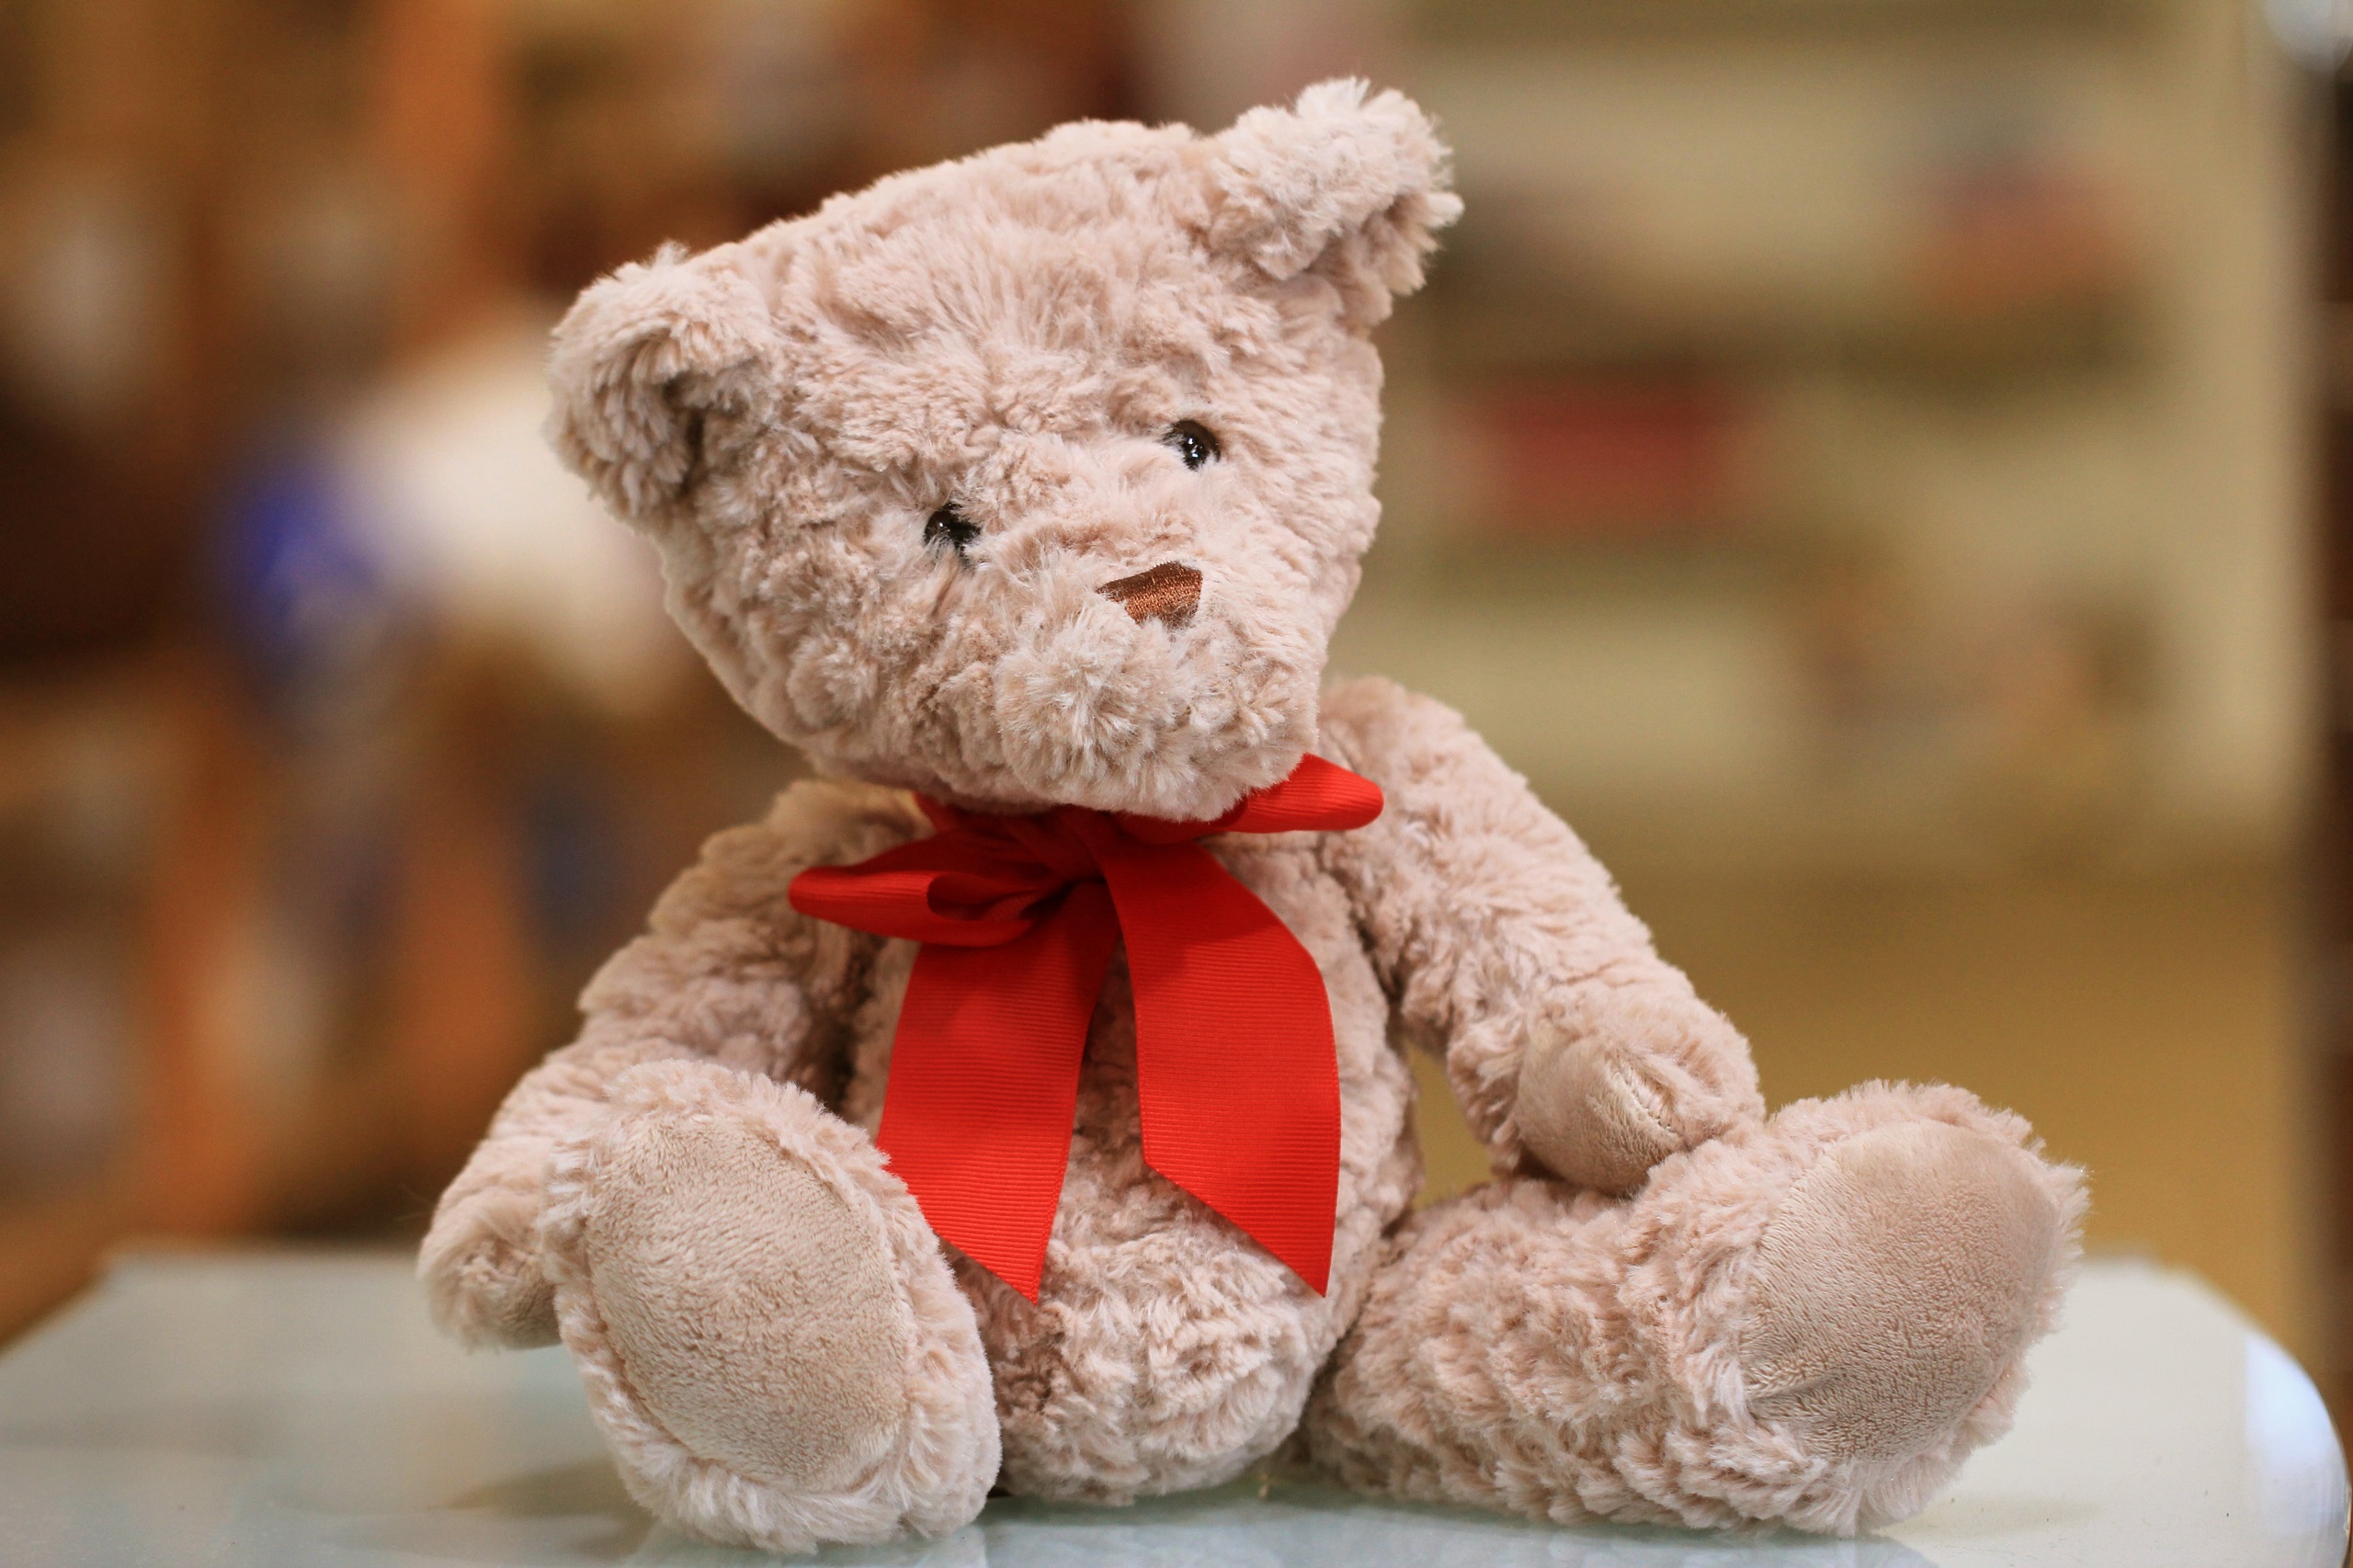 A fluffy tan teddy bear with a red bow around his neck sits on a table